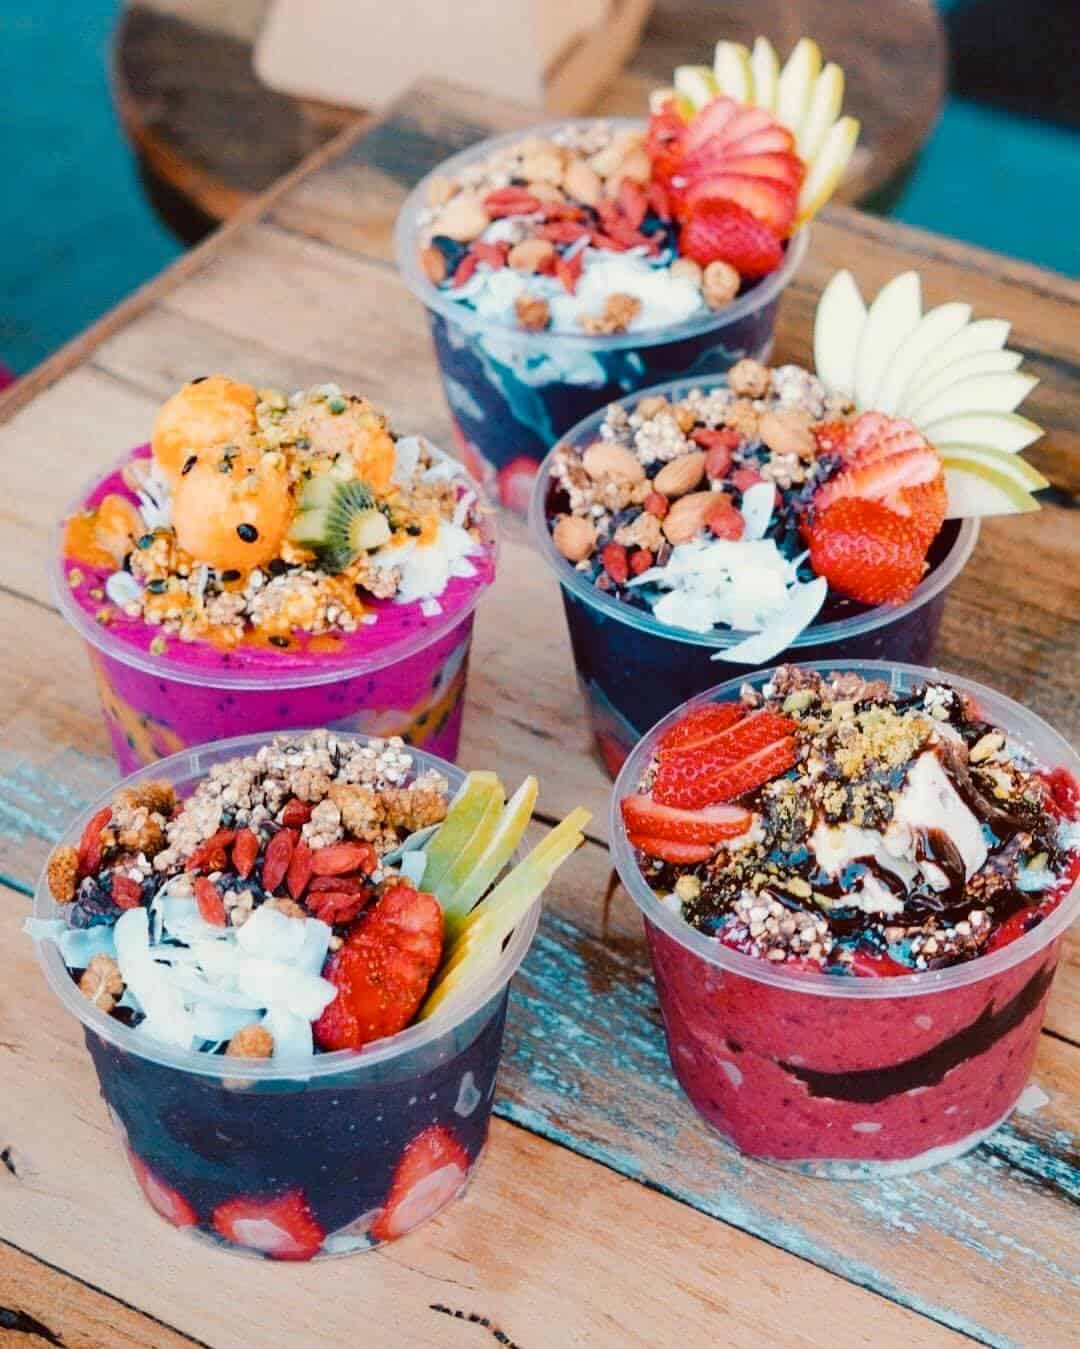 Acai bowls and smoothie food truck catering